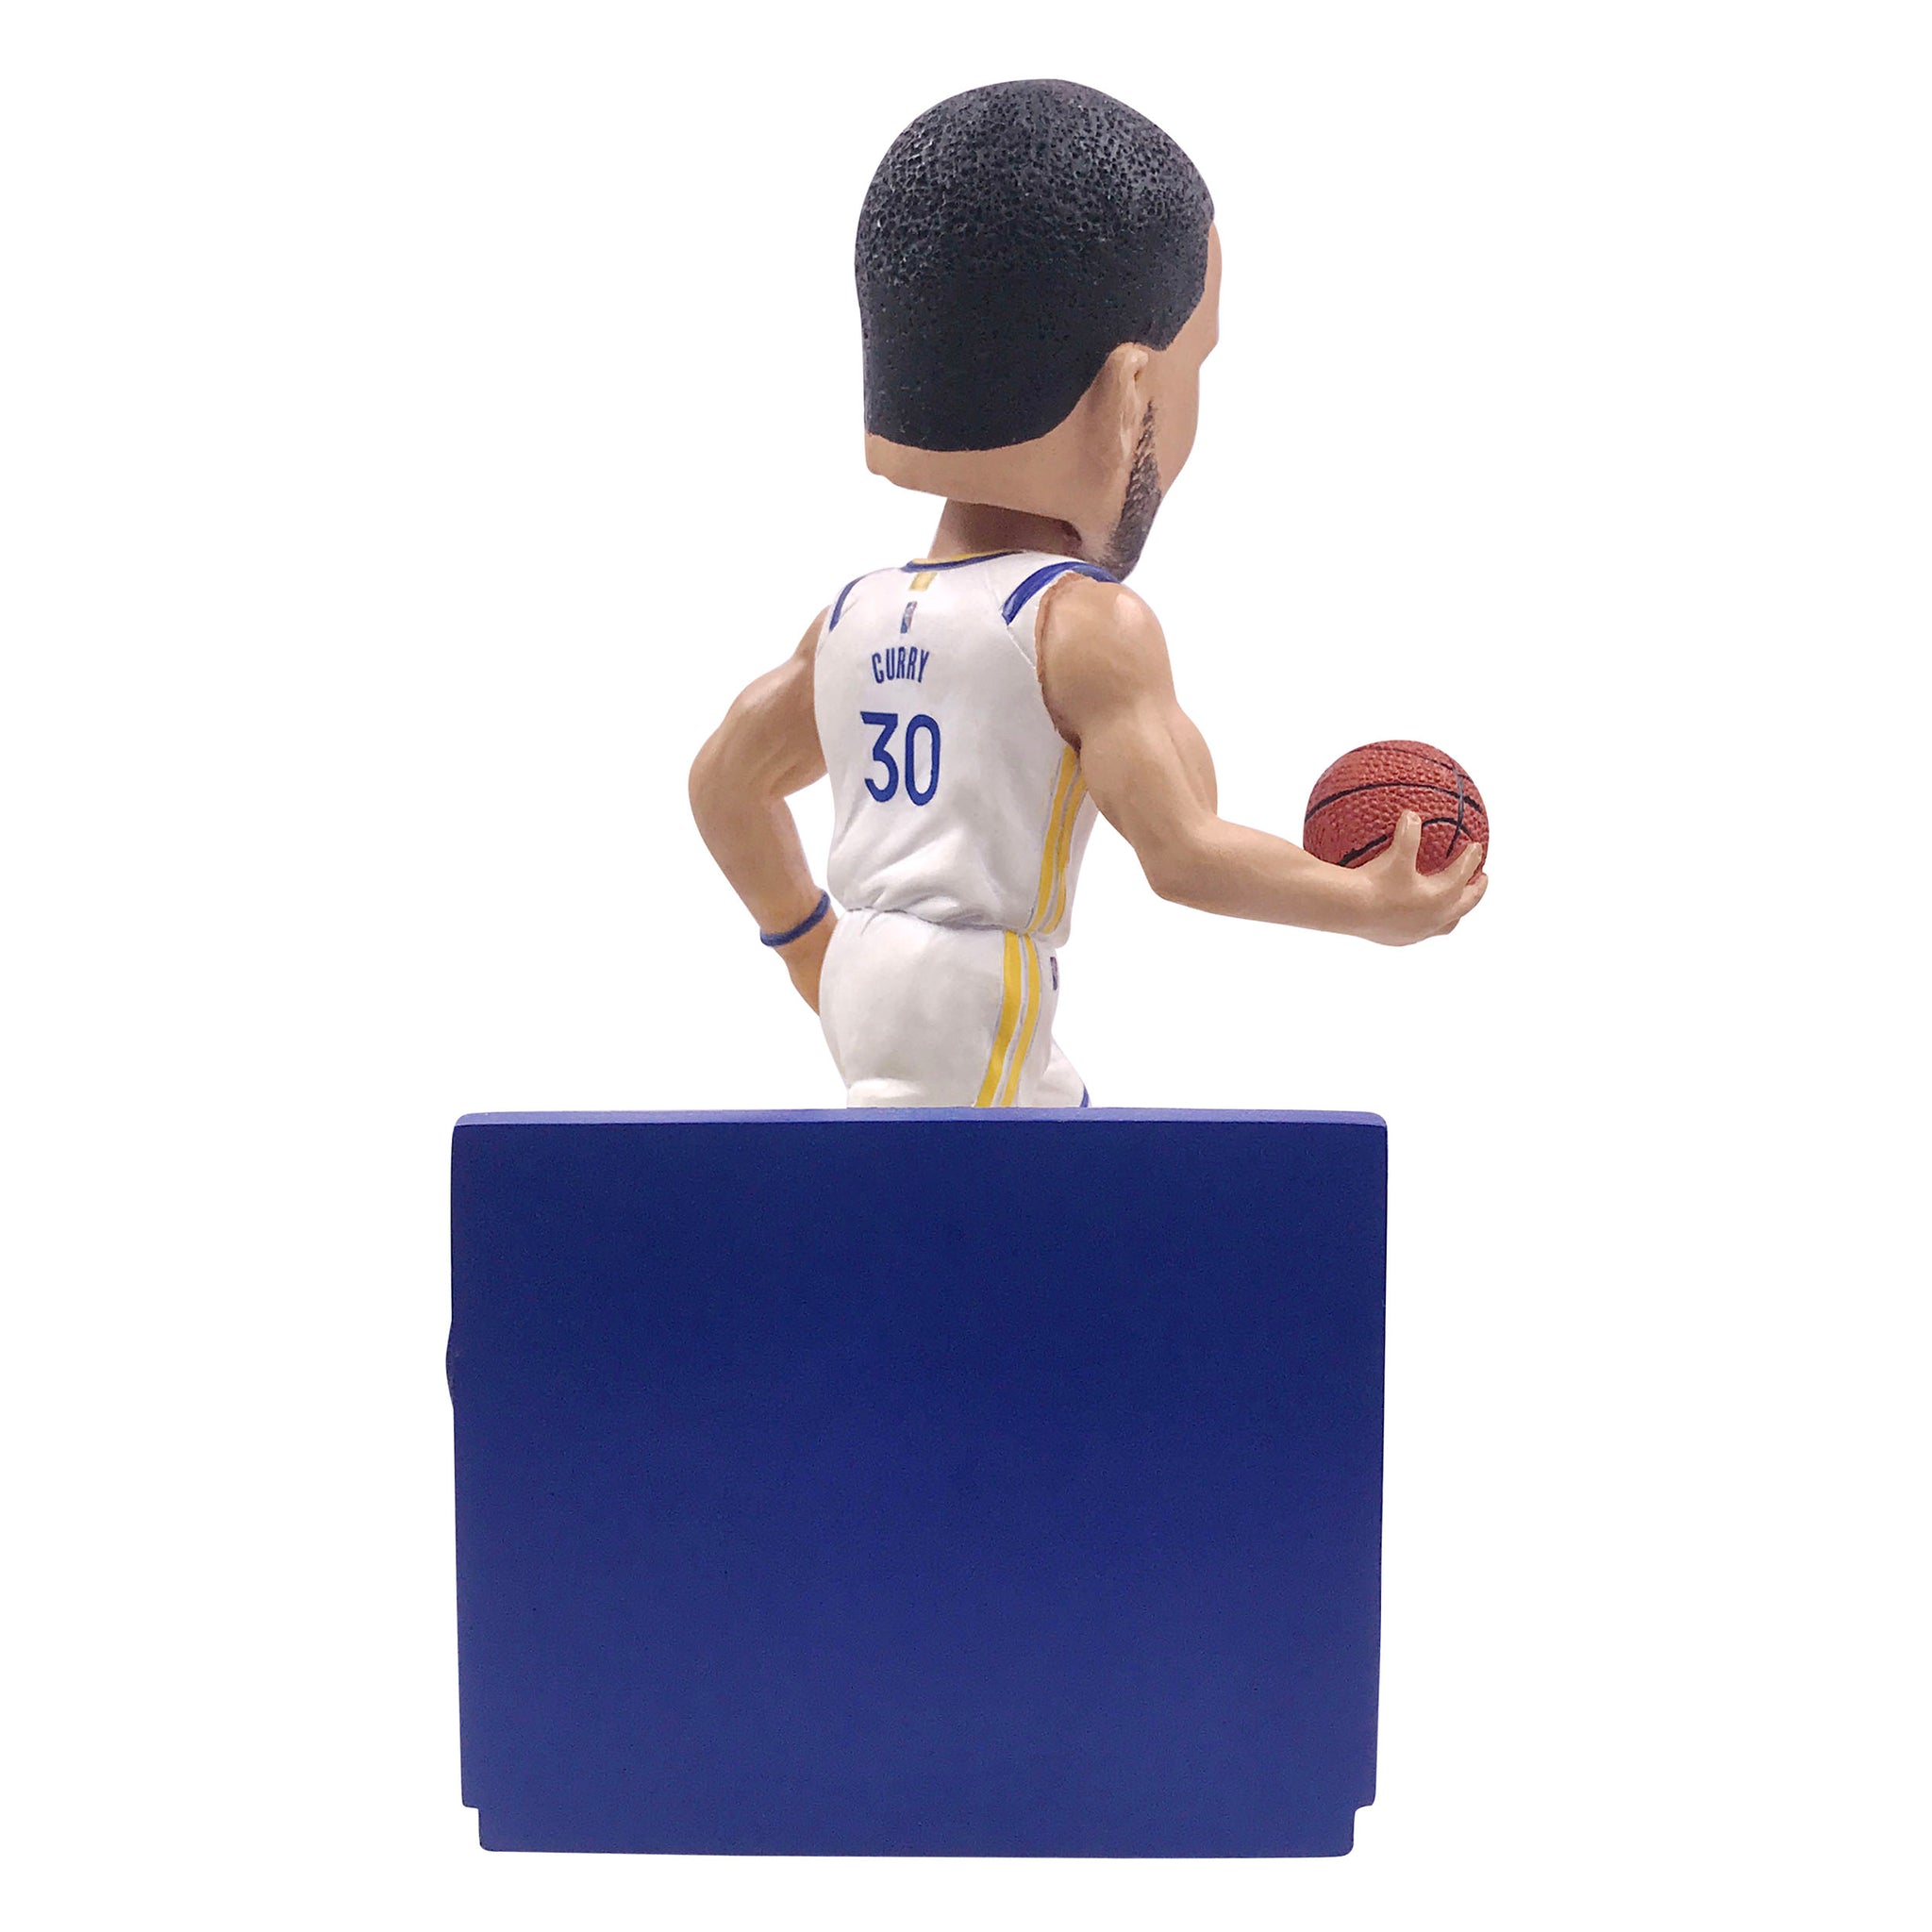 Stephen curry player bobble-